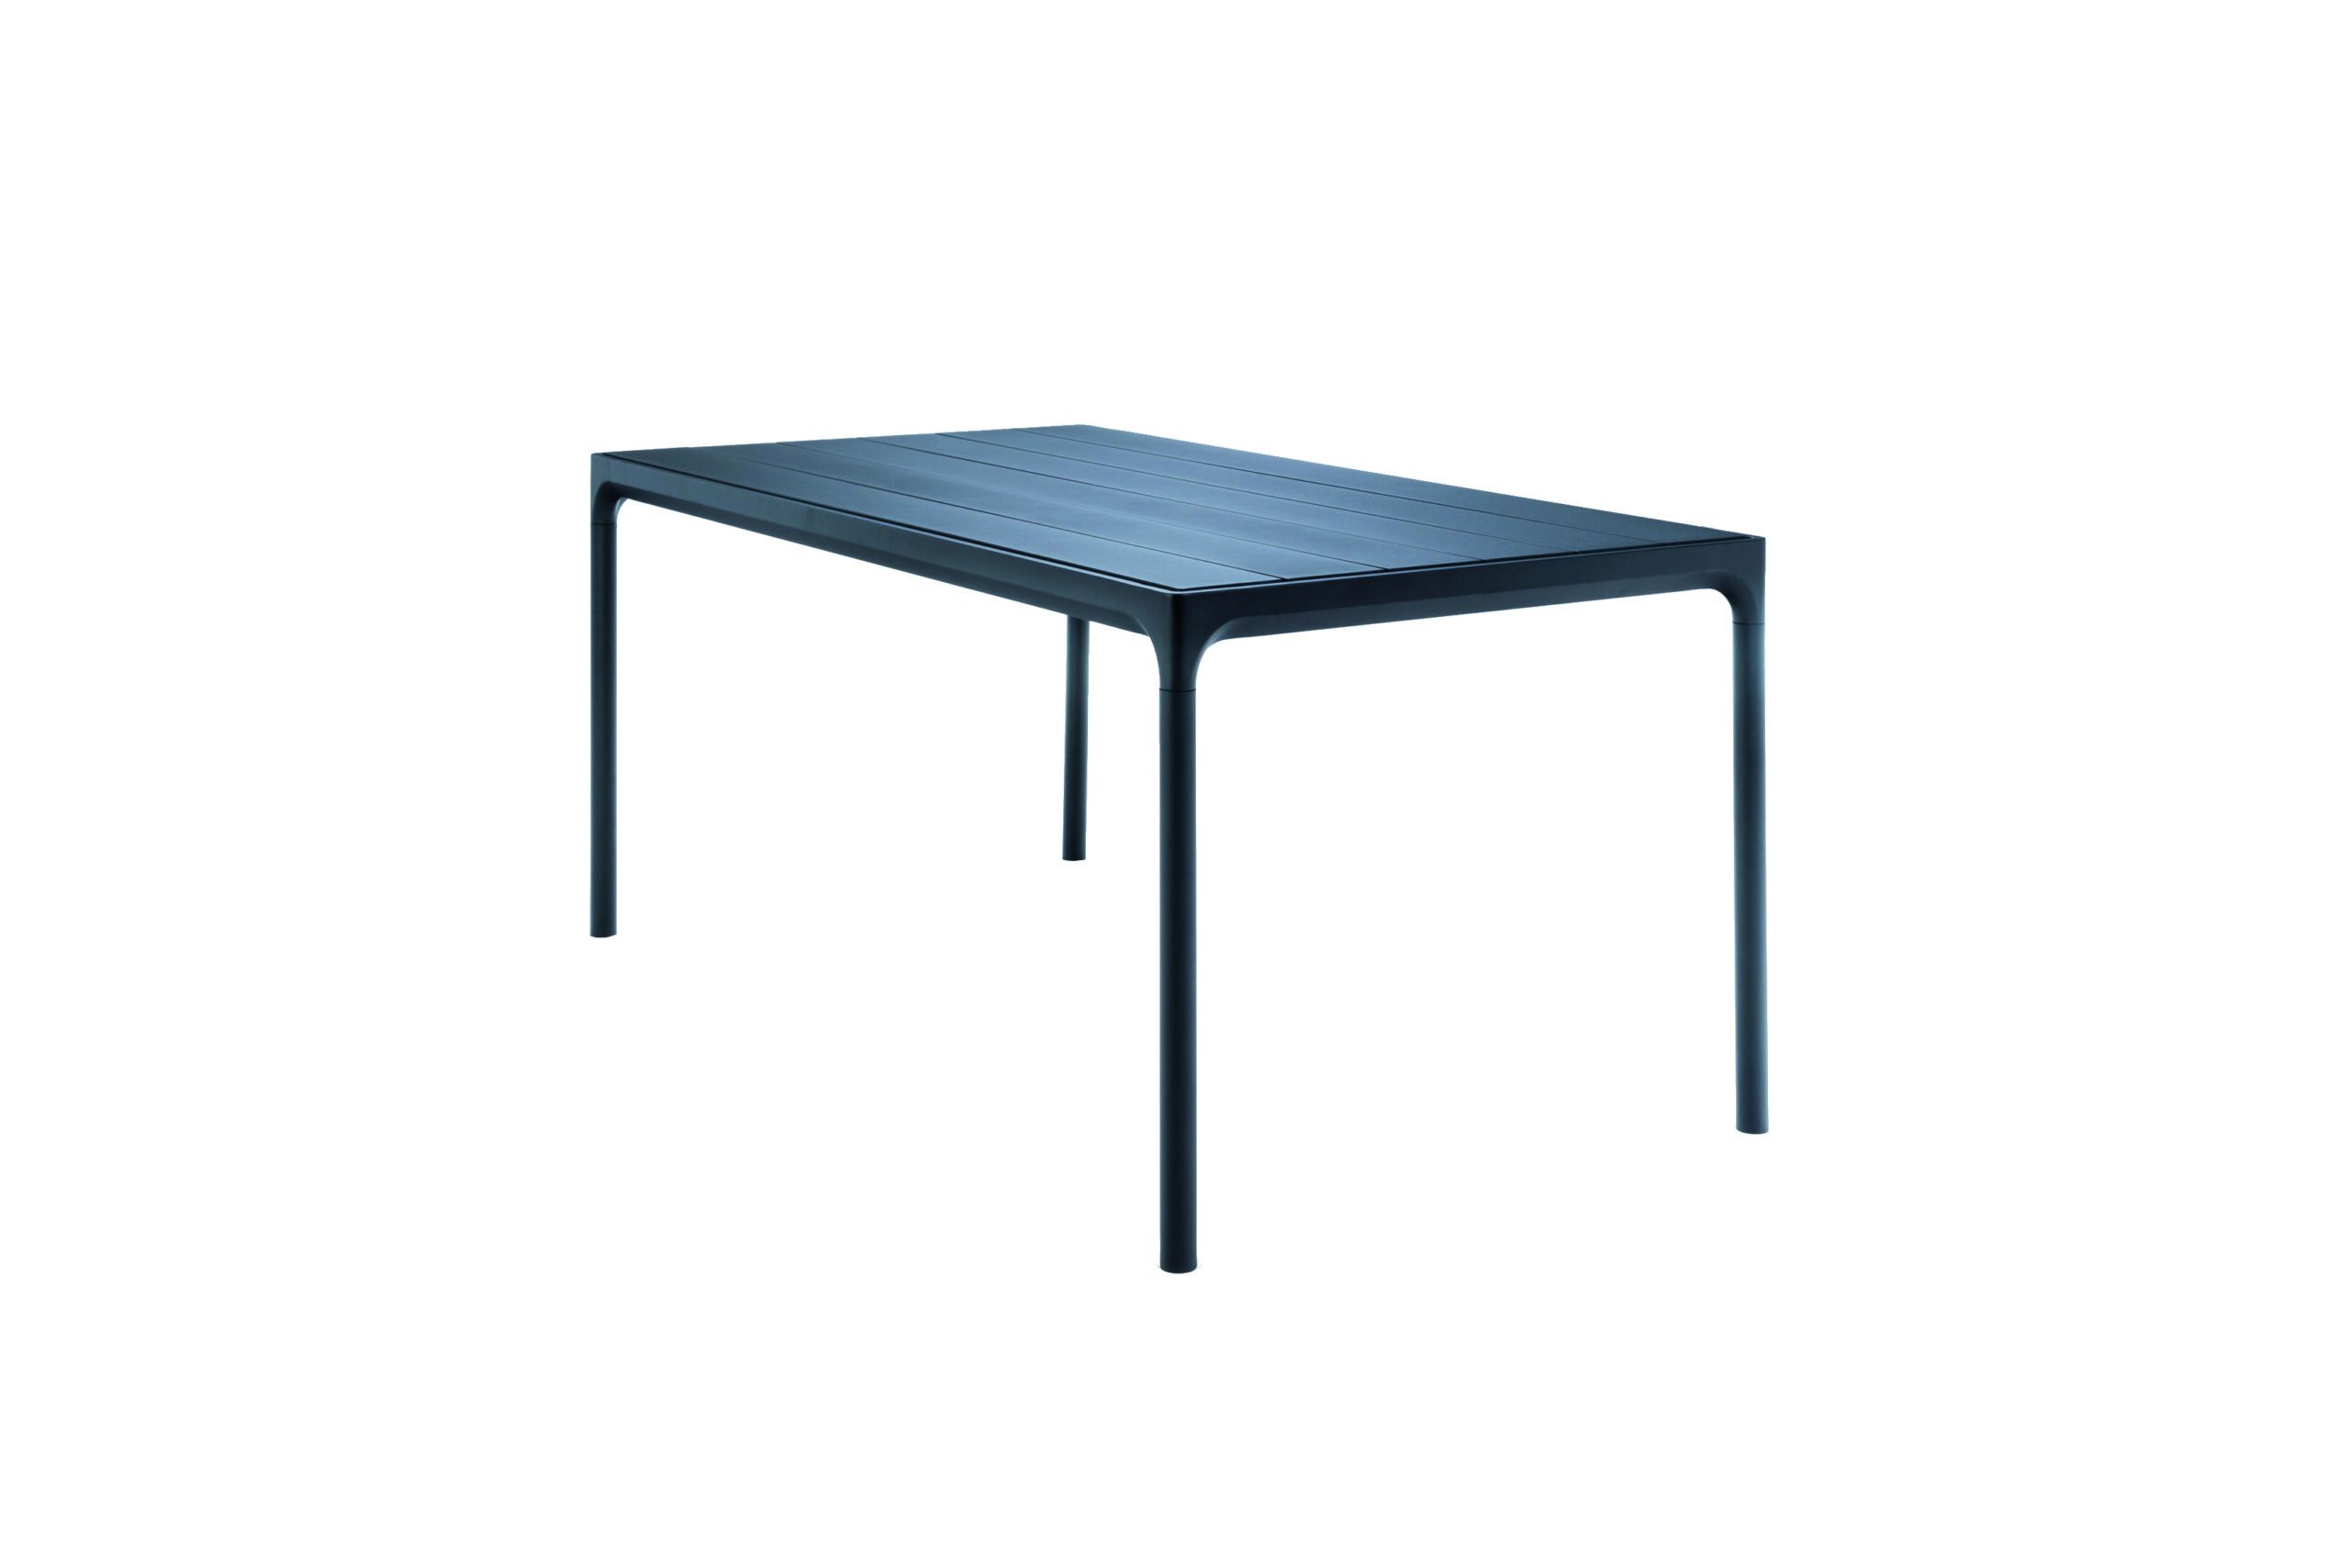 Houe - Four Rectangle Outdoor Dining Table - Black